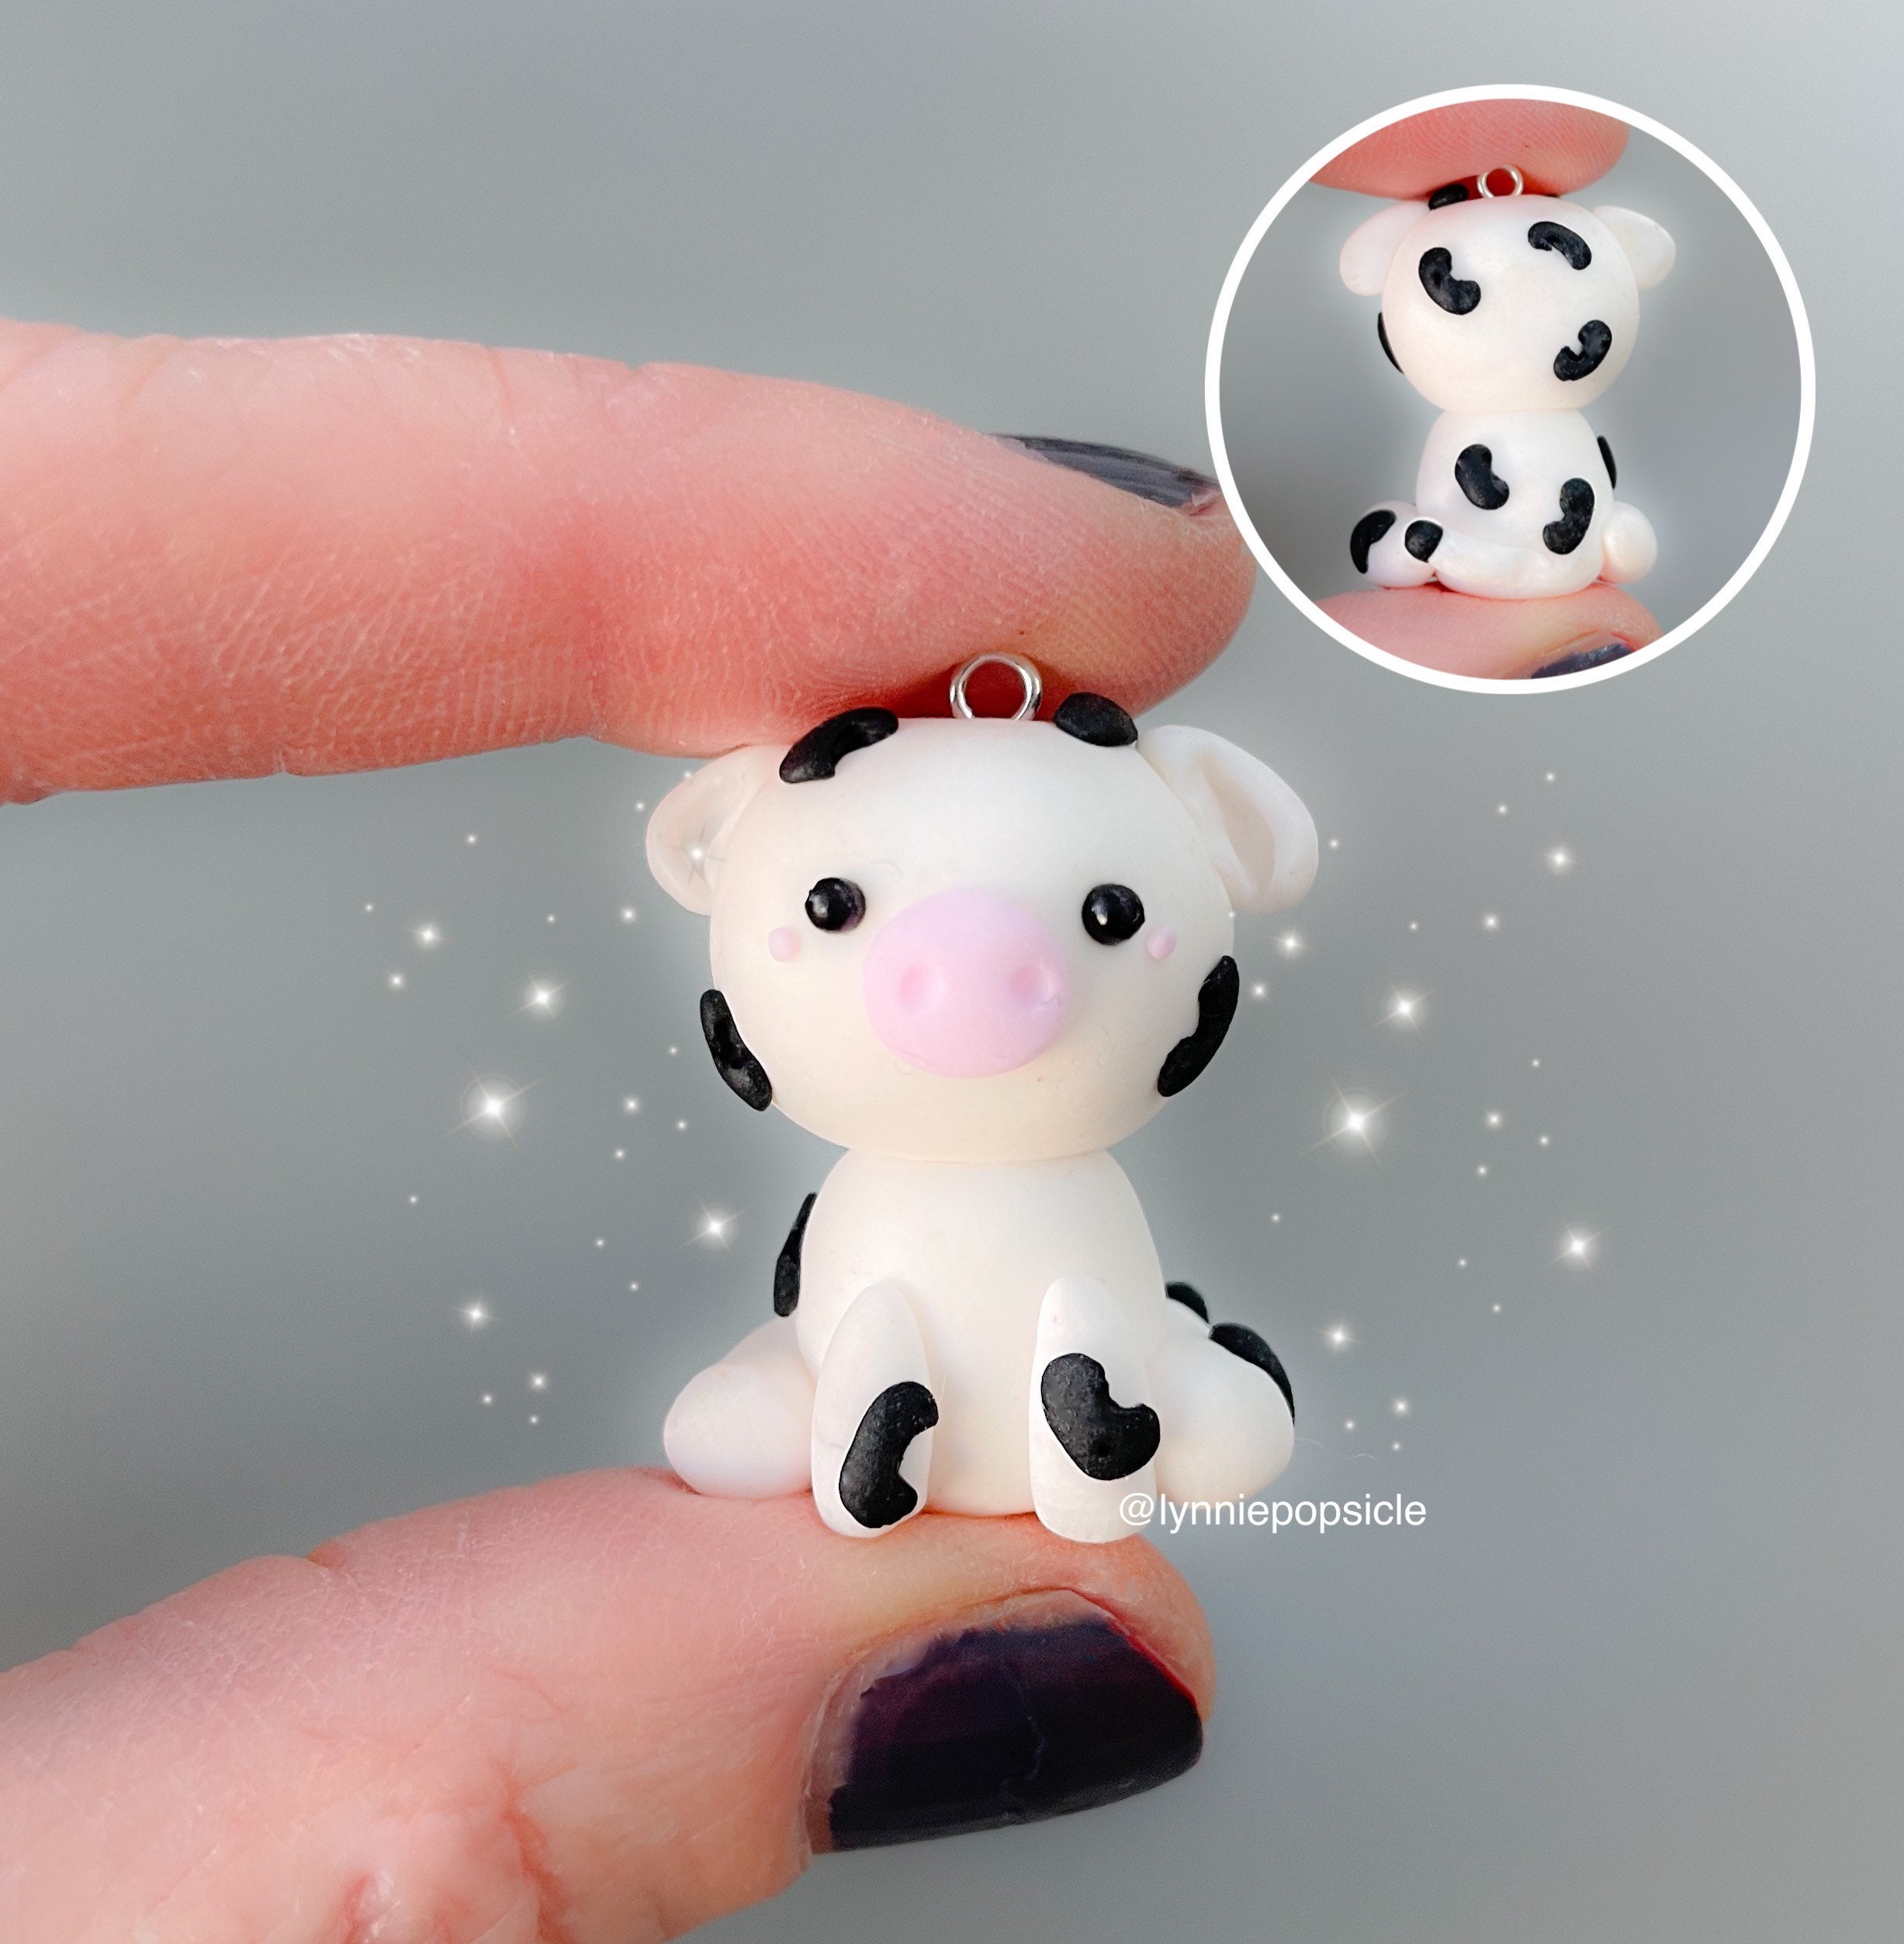 Vanproo 80 Pieces Cow Charms Colorful Enamel Cute Charms Cute Cow Shape  Pendant for Bracelet Necklace Earrings Keychain DIY Jewelry Making ( Black